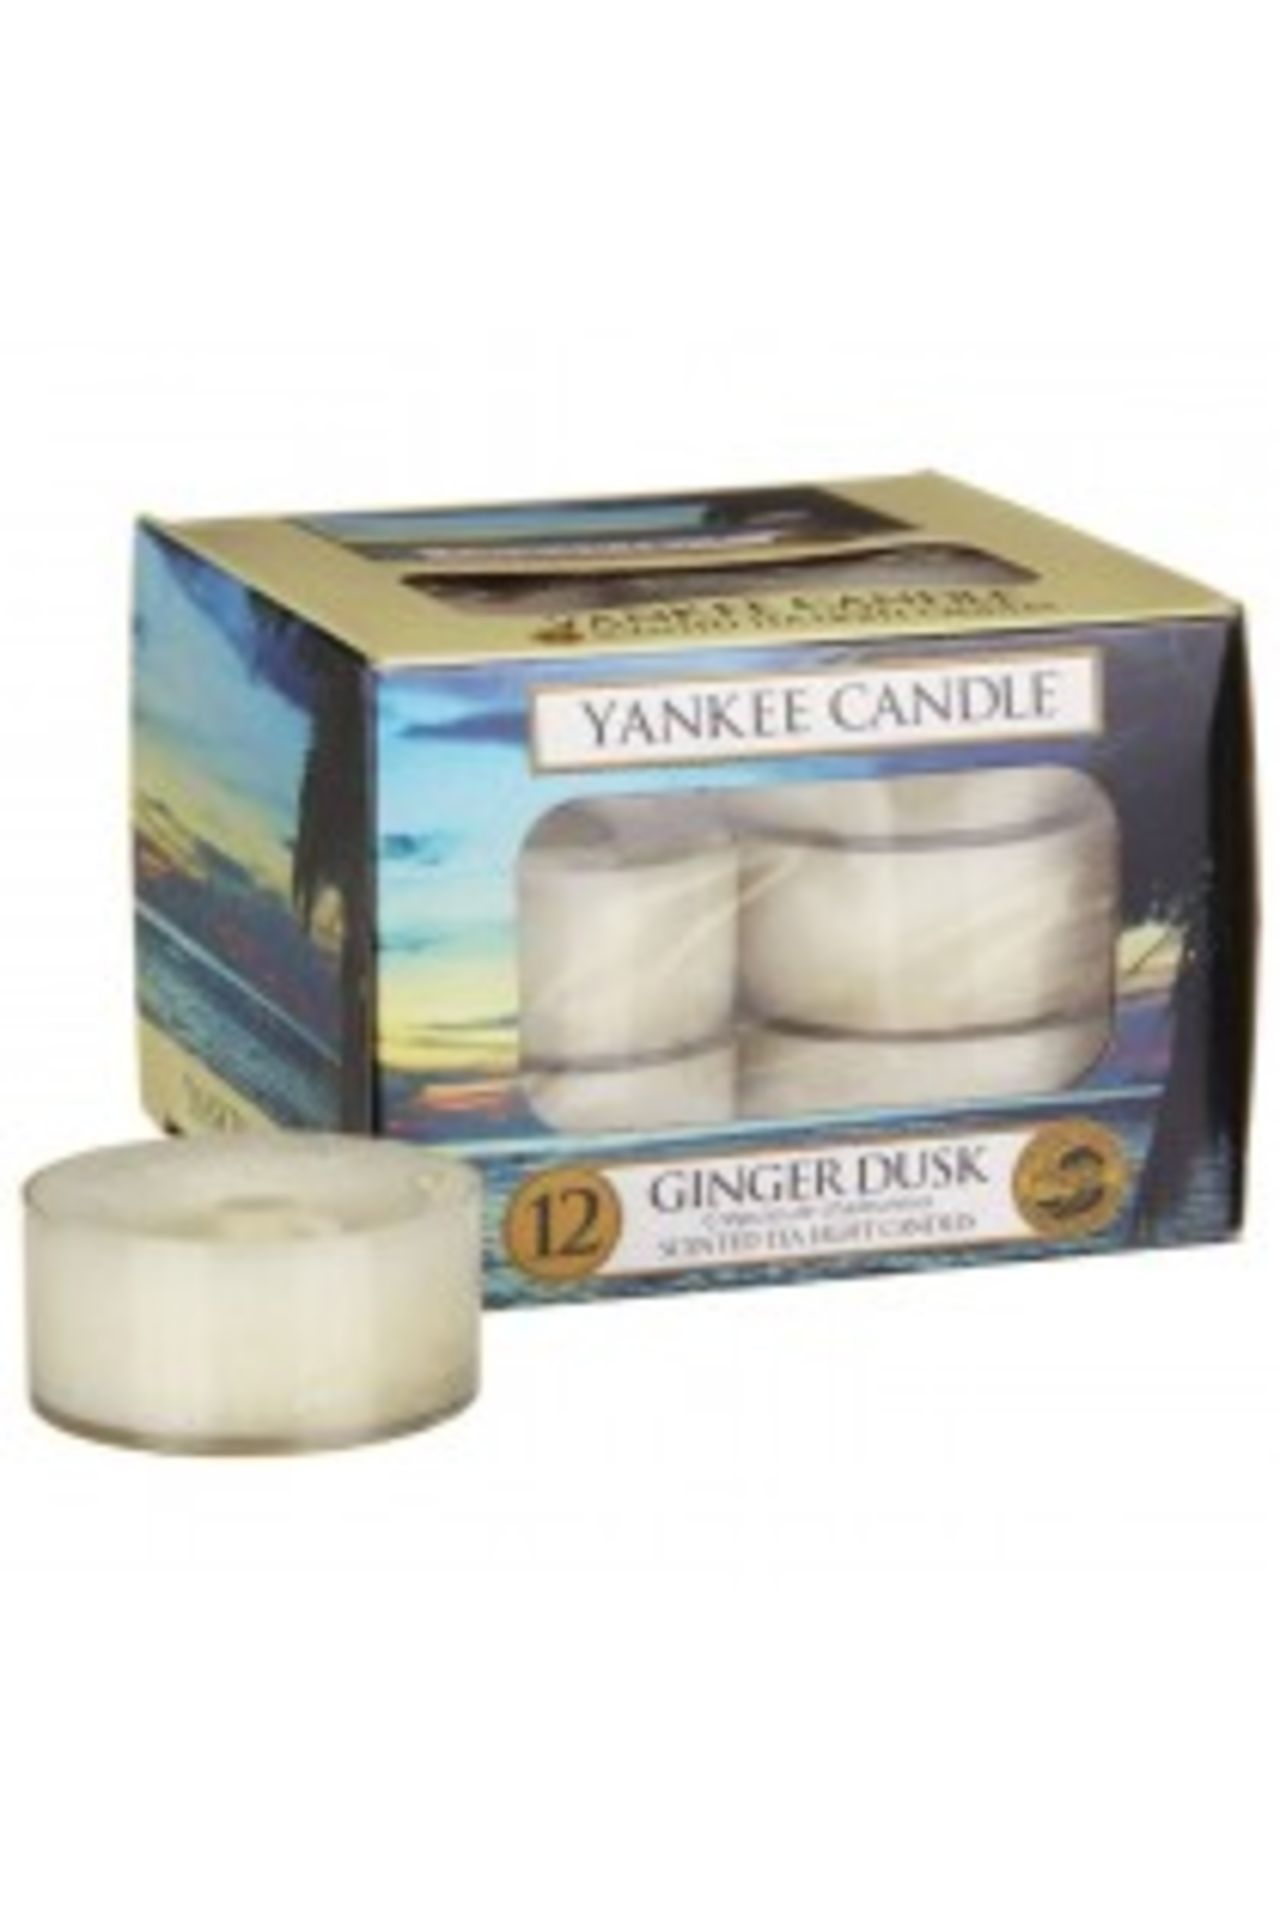 V *TRADE QTY* Brand New 12 Yankee Candle Scented Tea Light Candles Ginger Dusk eBay Price £6.95 X